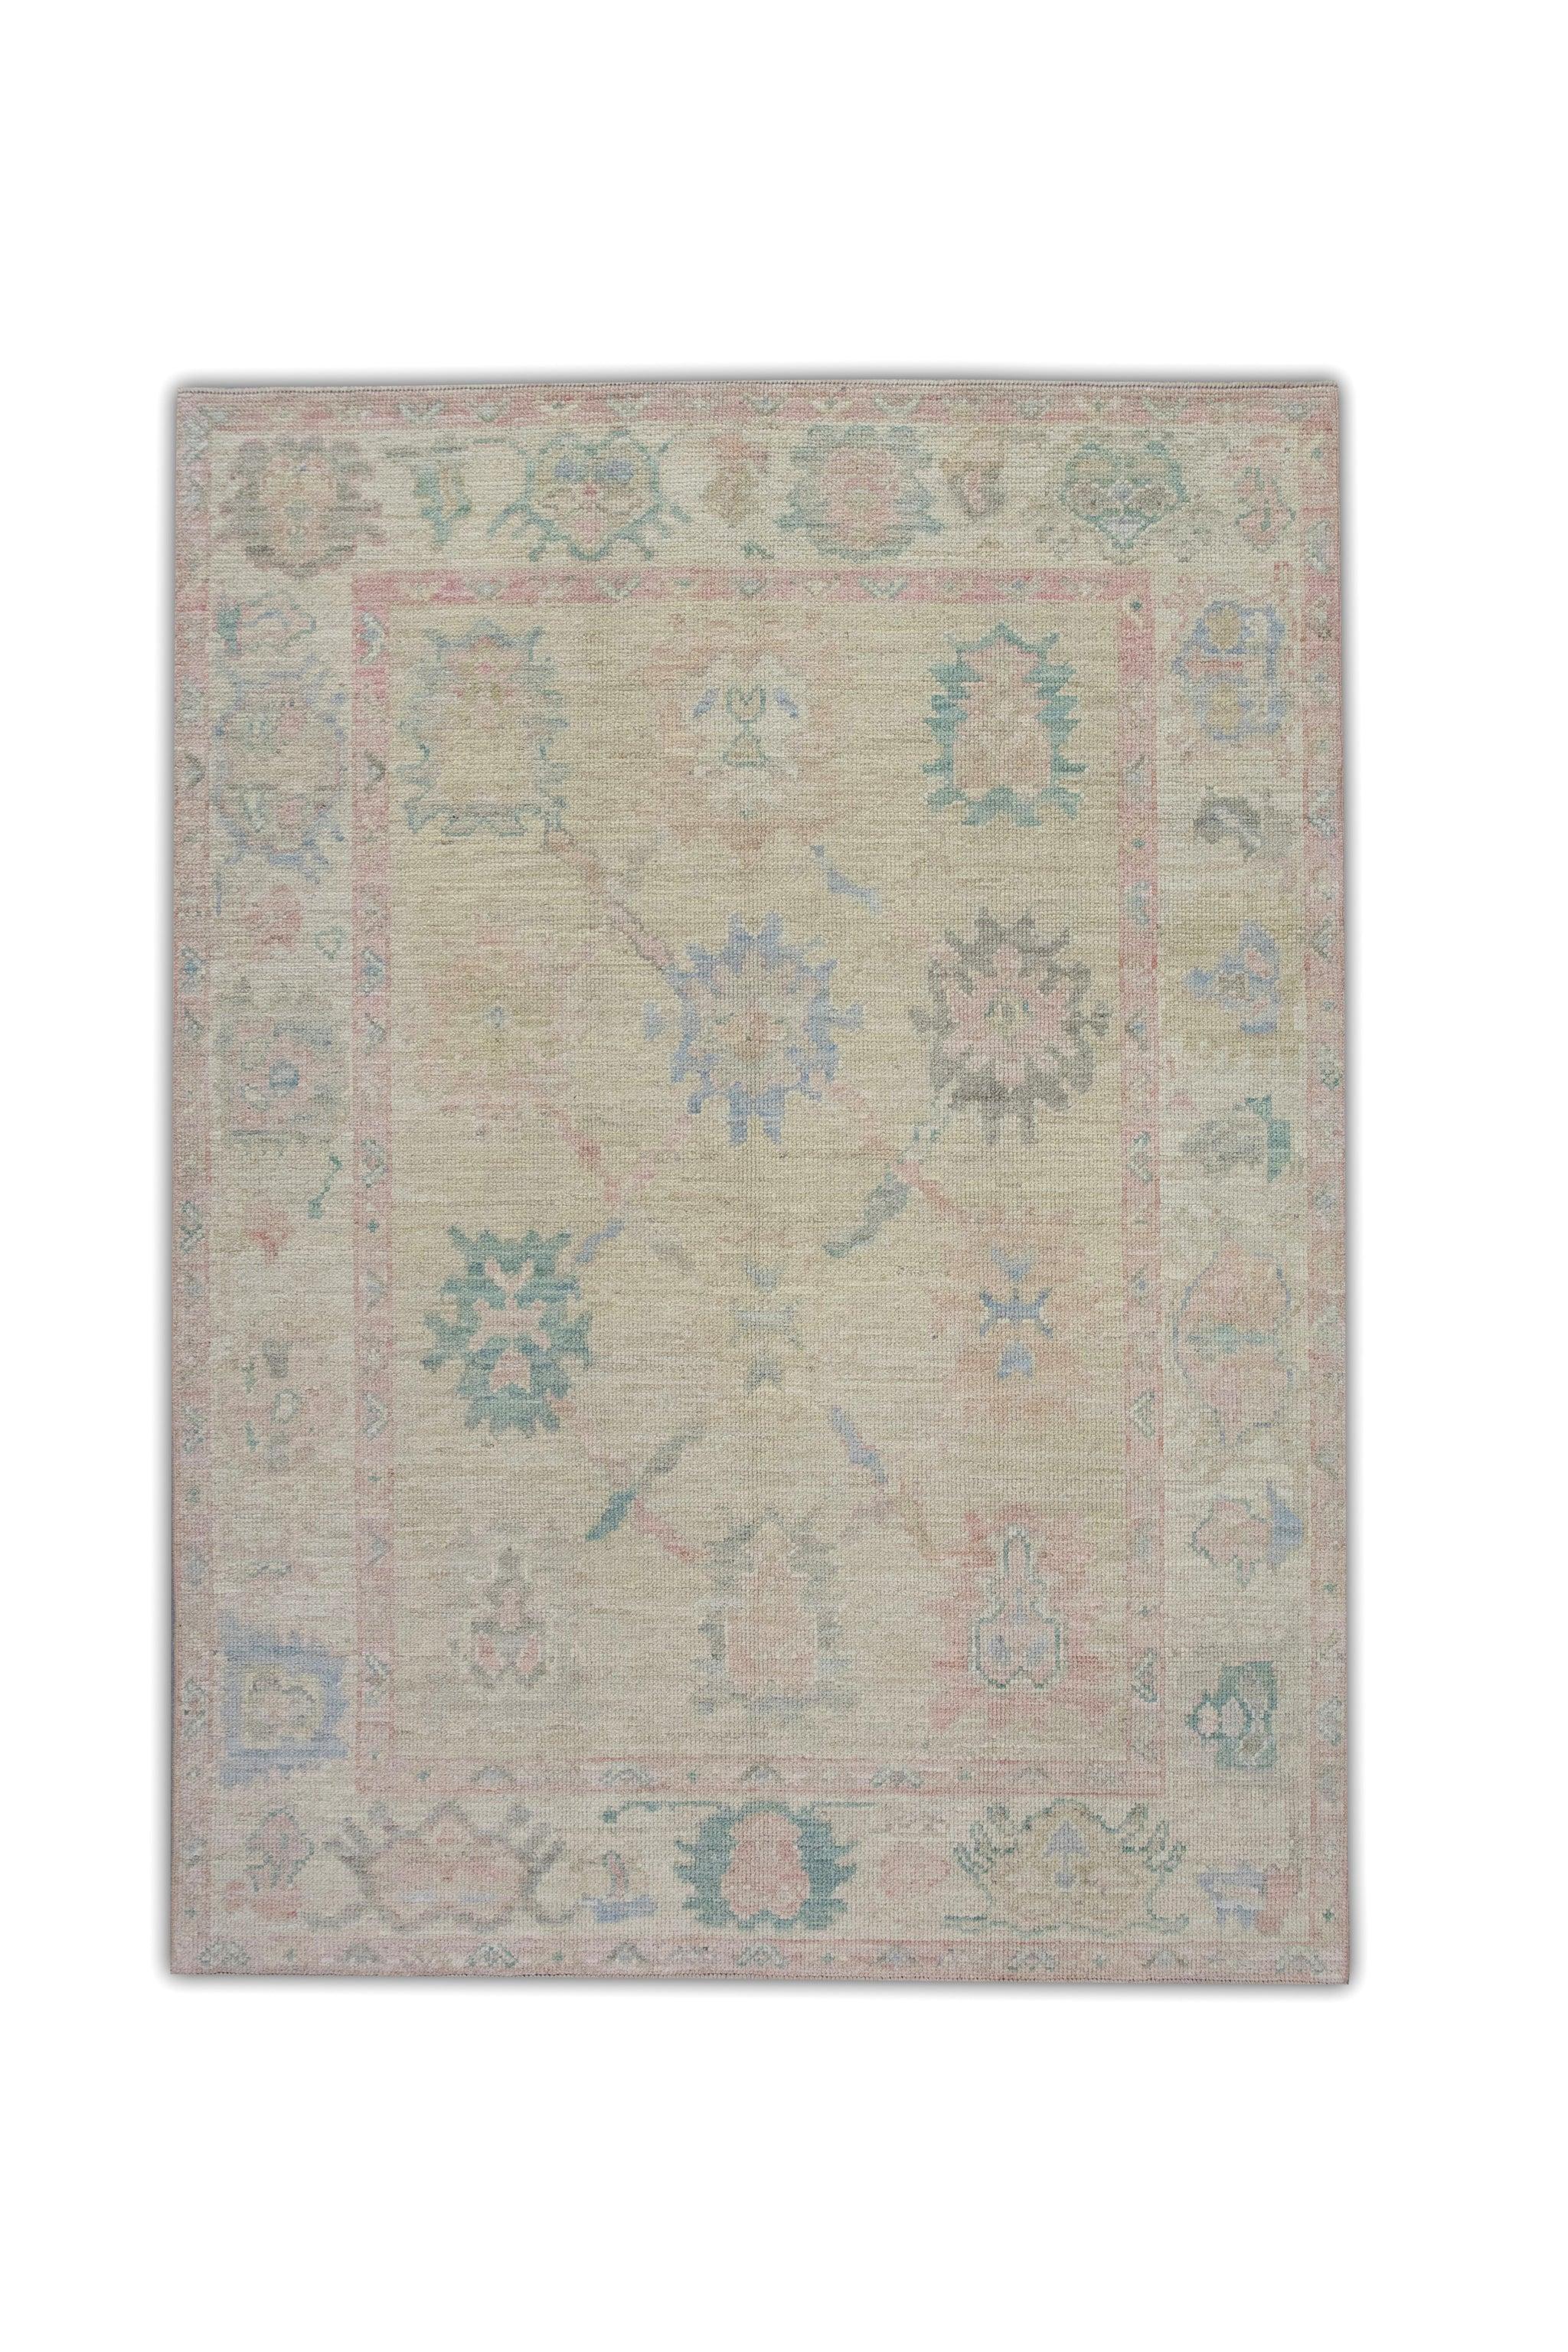 Multicolor Floral Handwoven Wool Turkish Oushak Rug 5' x 6'9